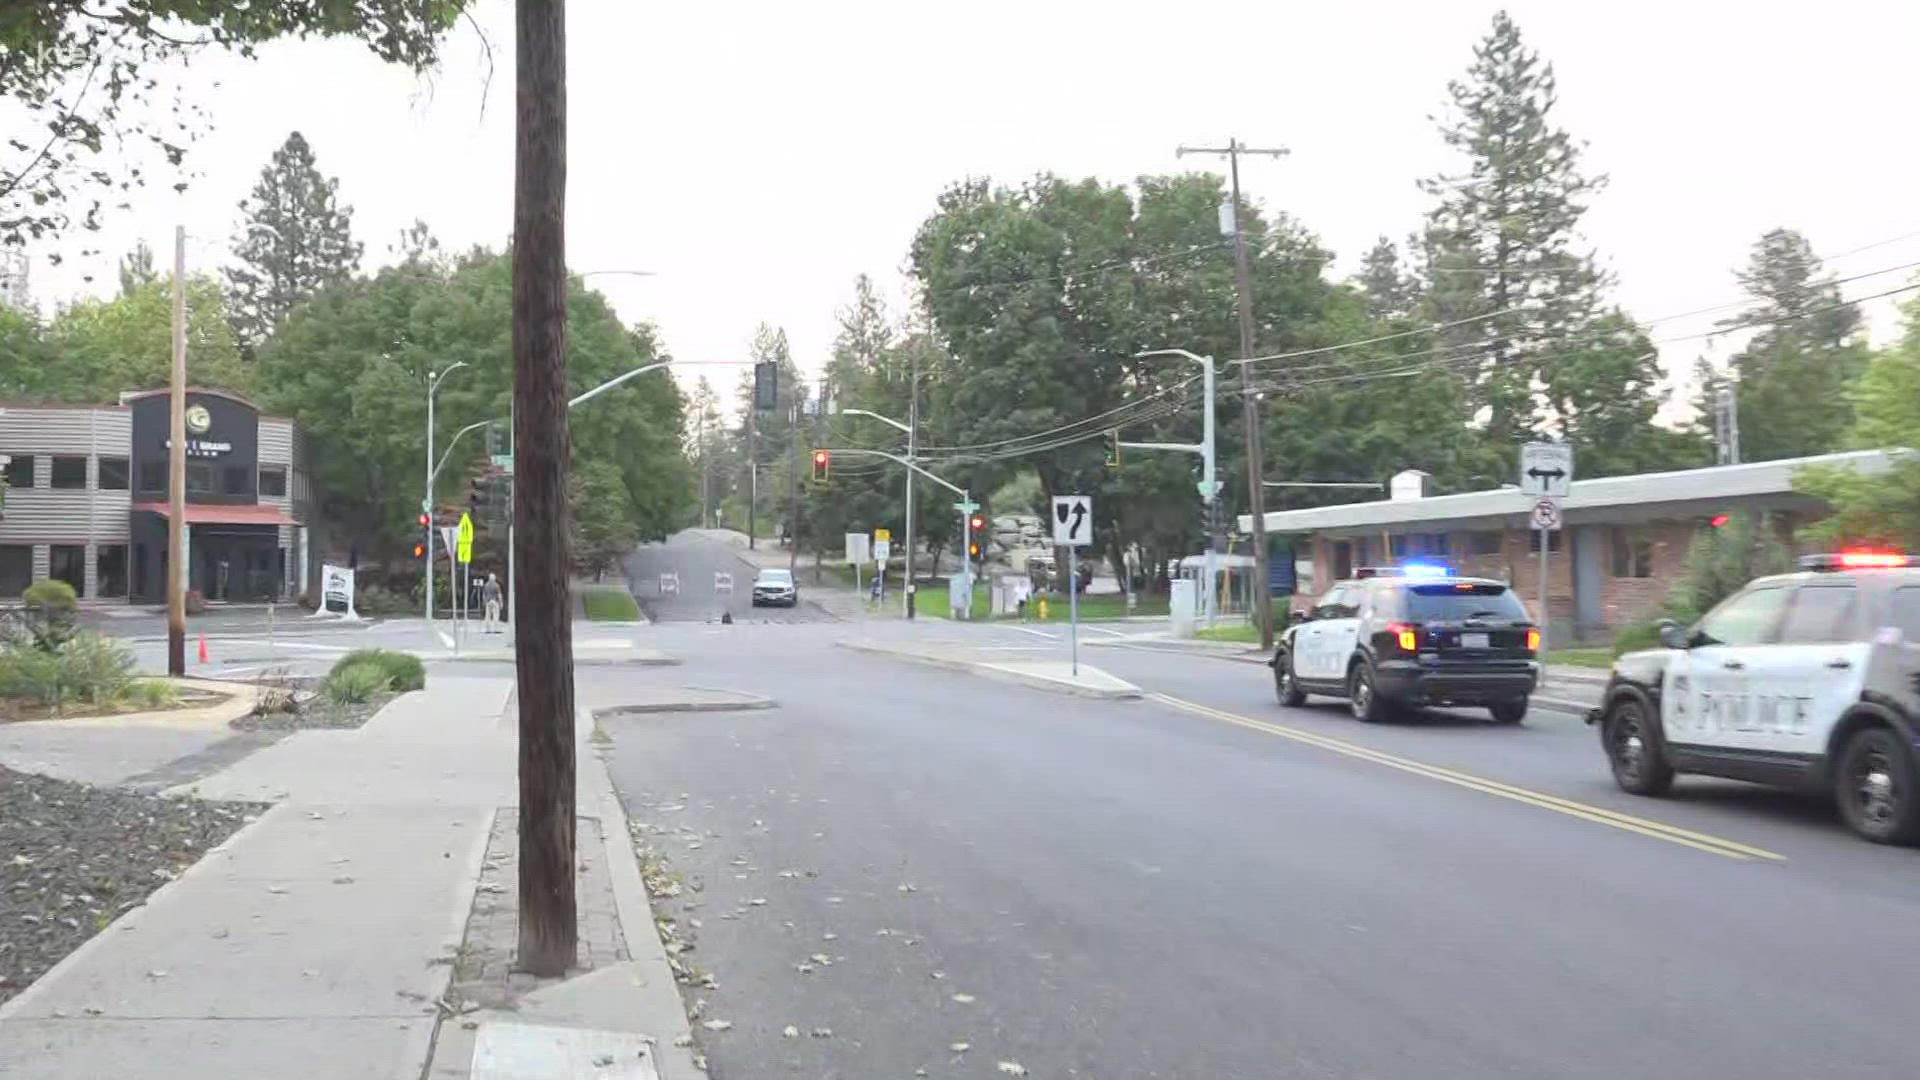 KREM2 is working to gather more information from Spokane police.